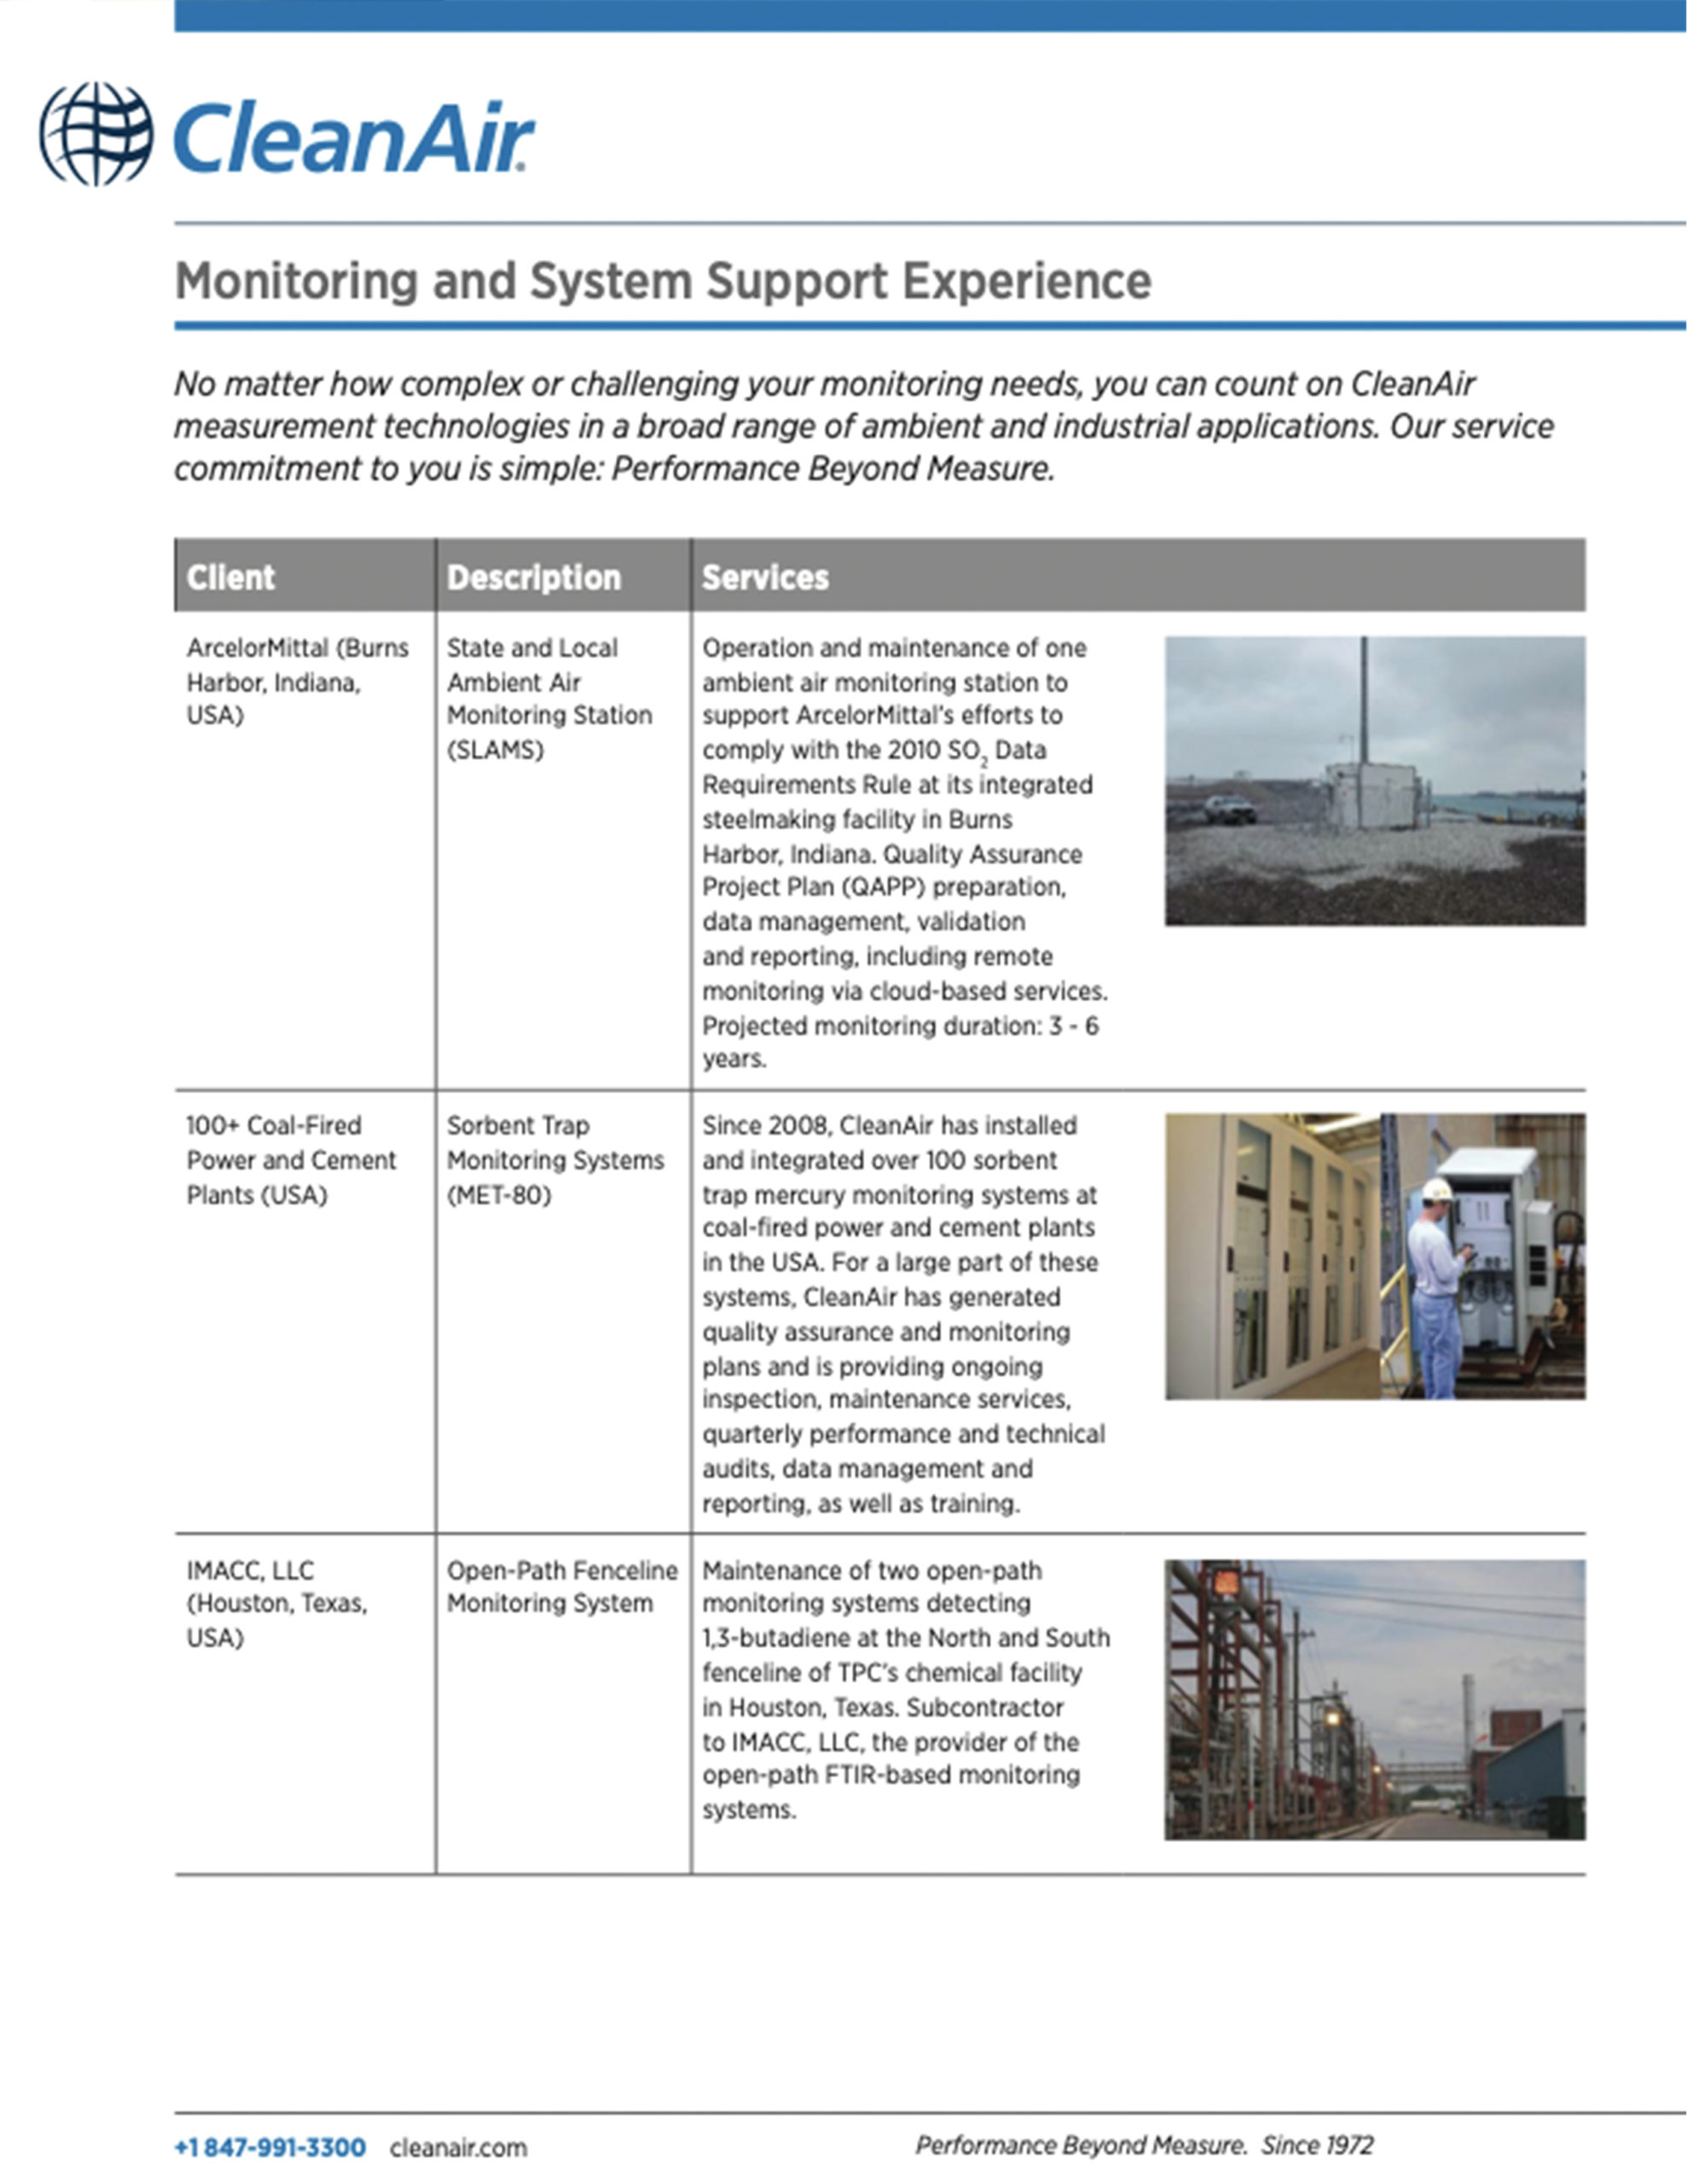 Monitoring-system-and-support-brochure-thumbnail-scaled-1